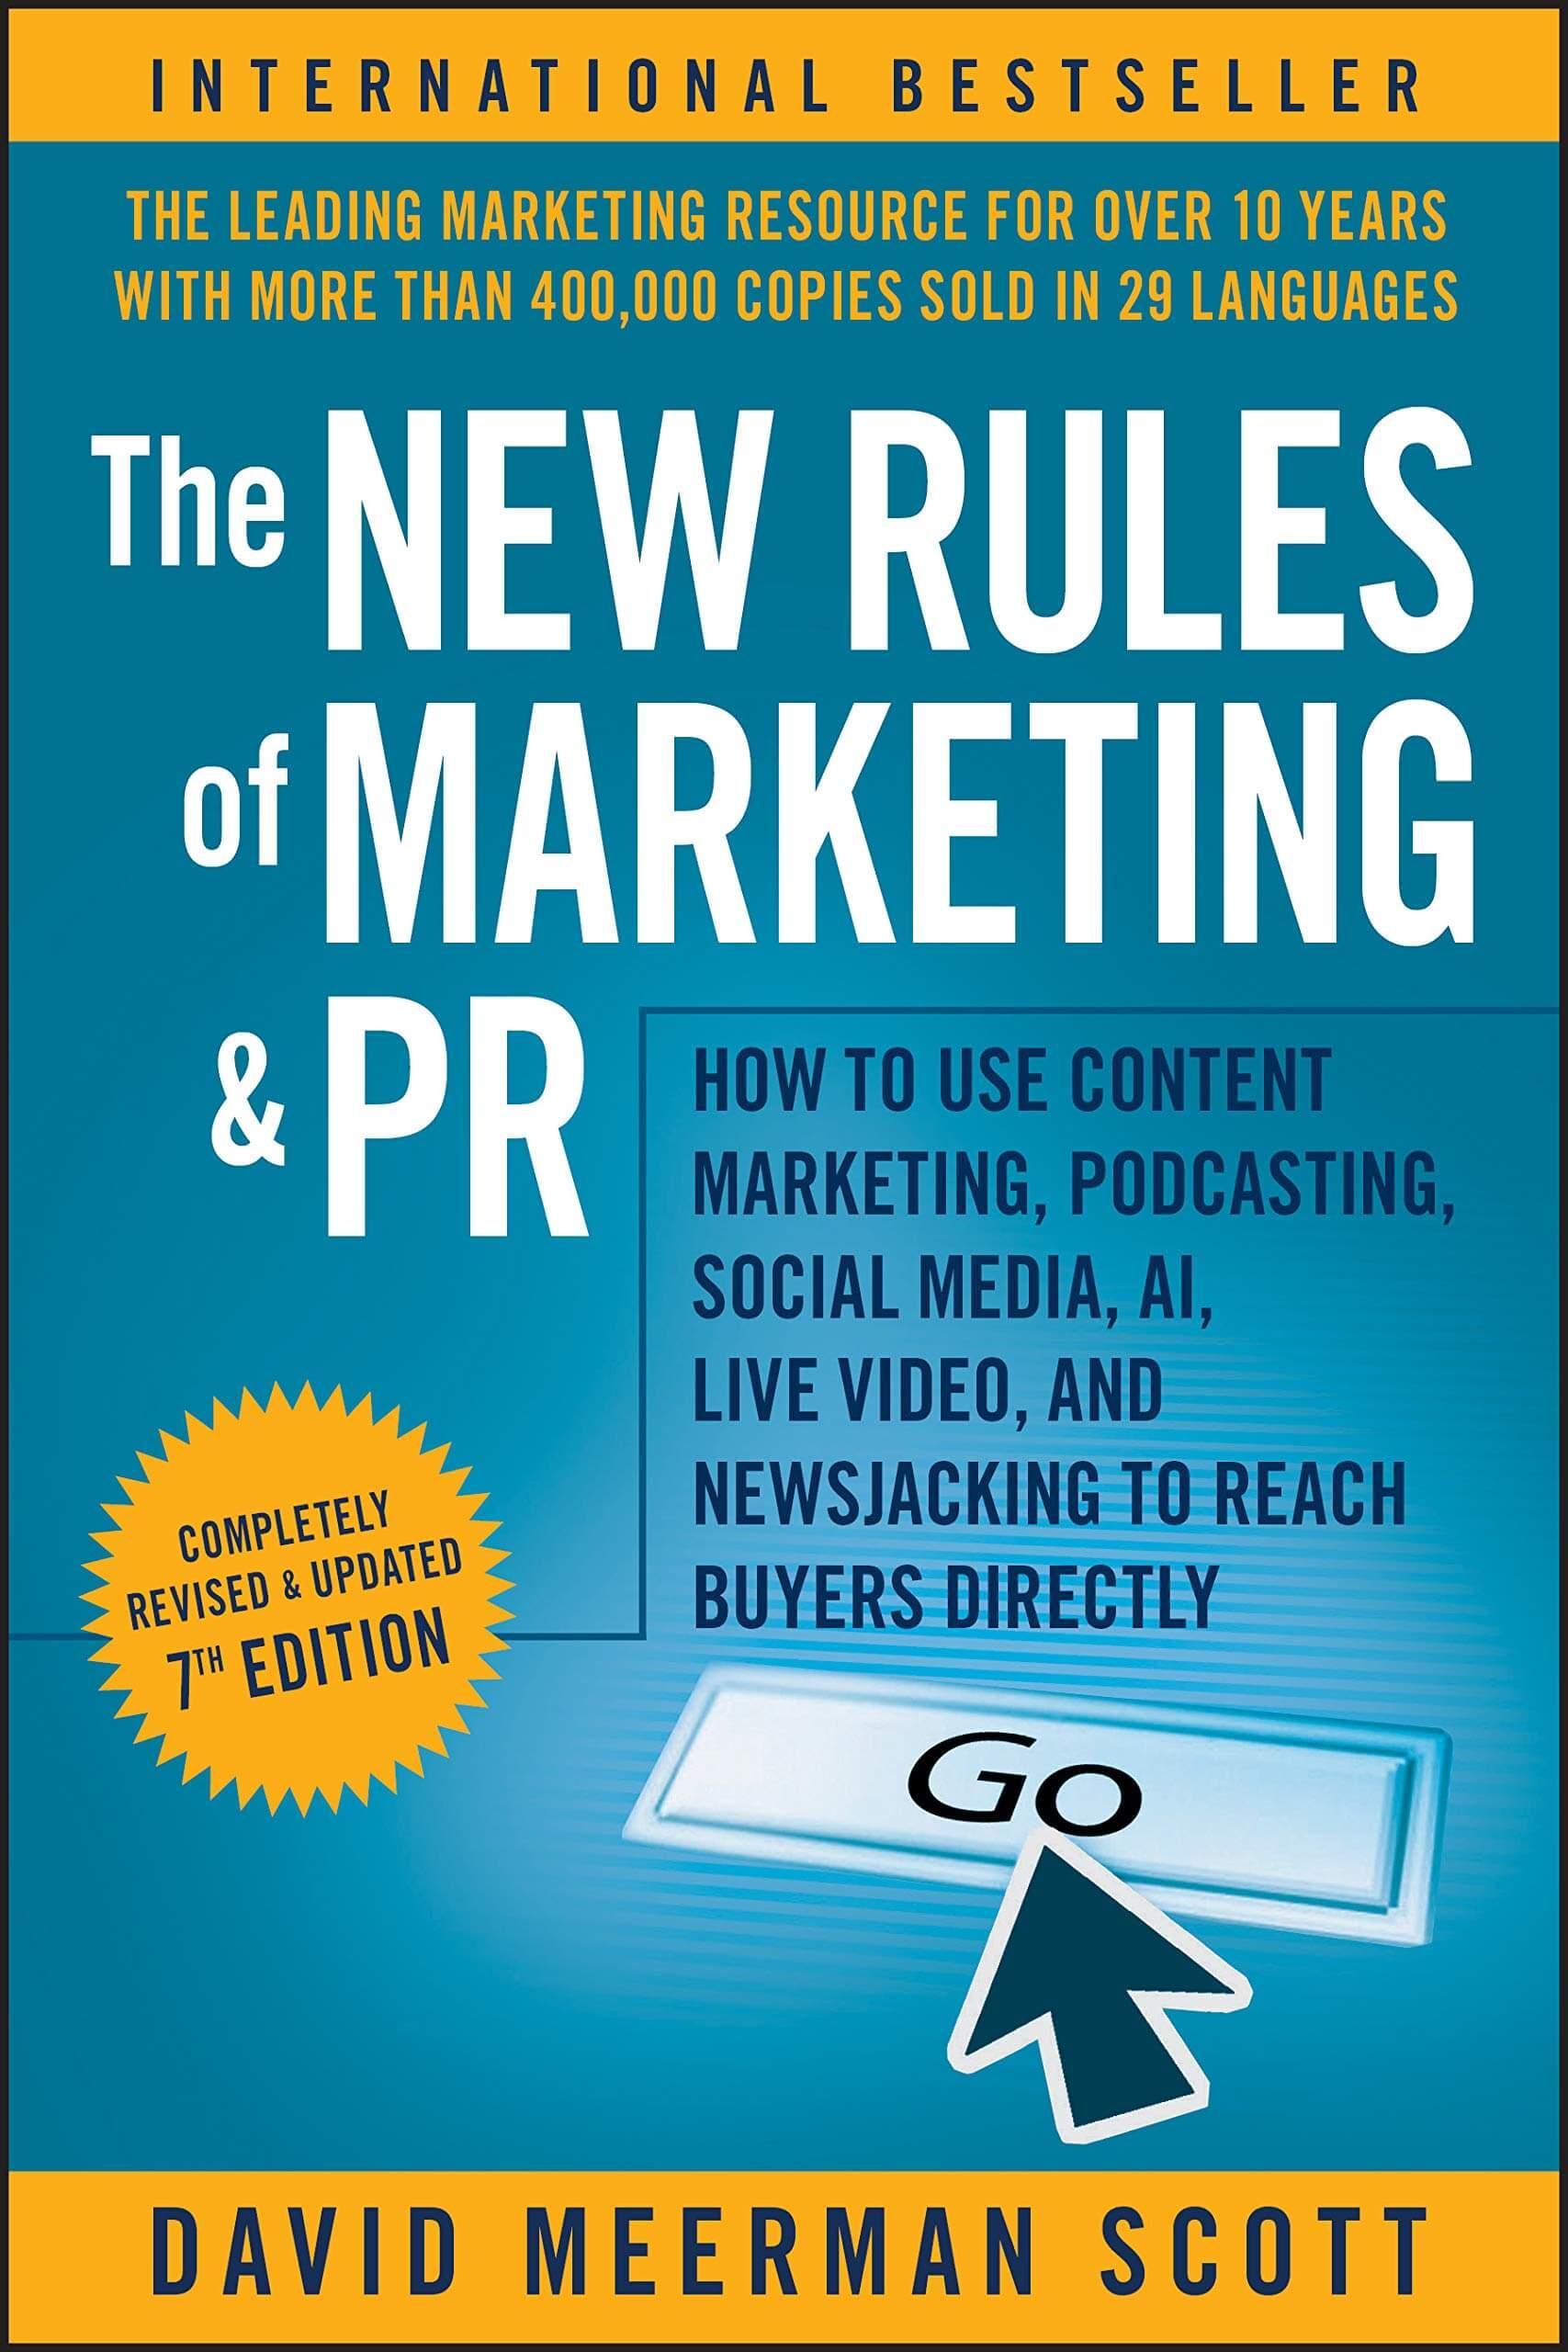 Book cover for David Meerman Scott's "The New Rules of Marketing and PR"